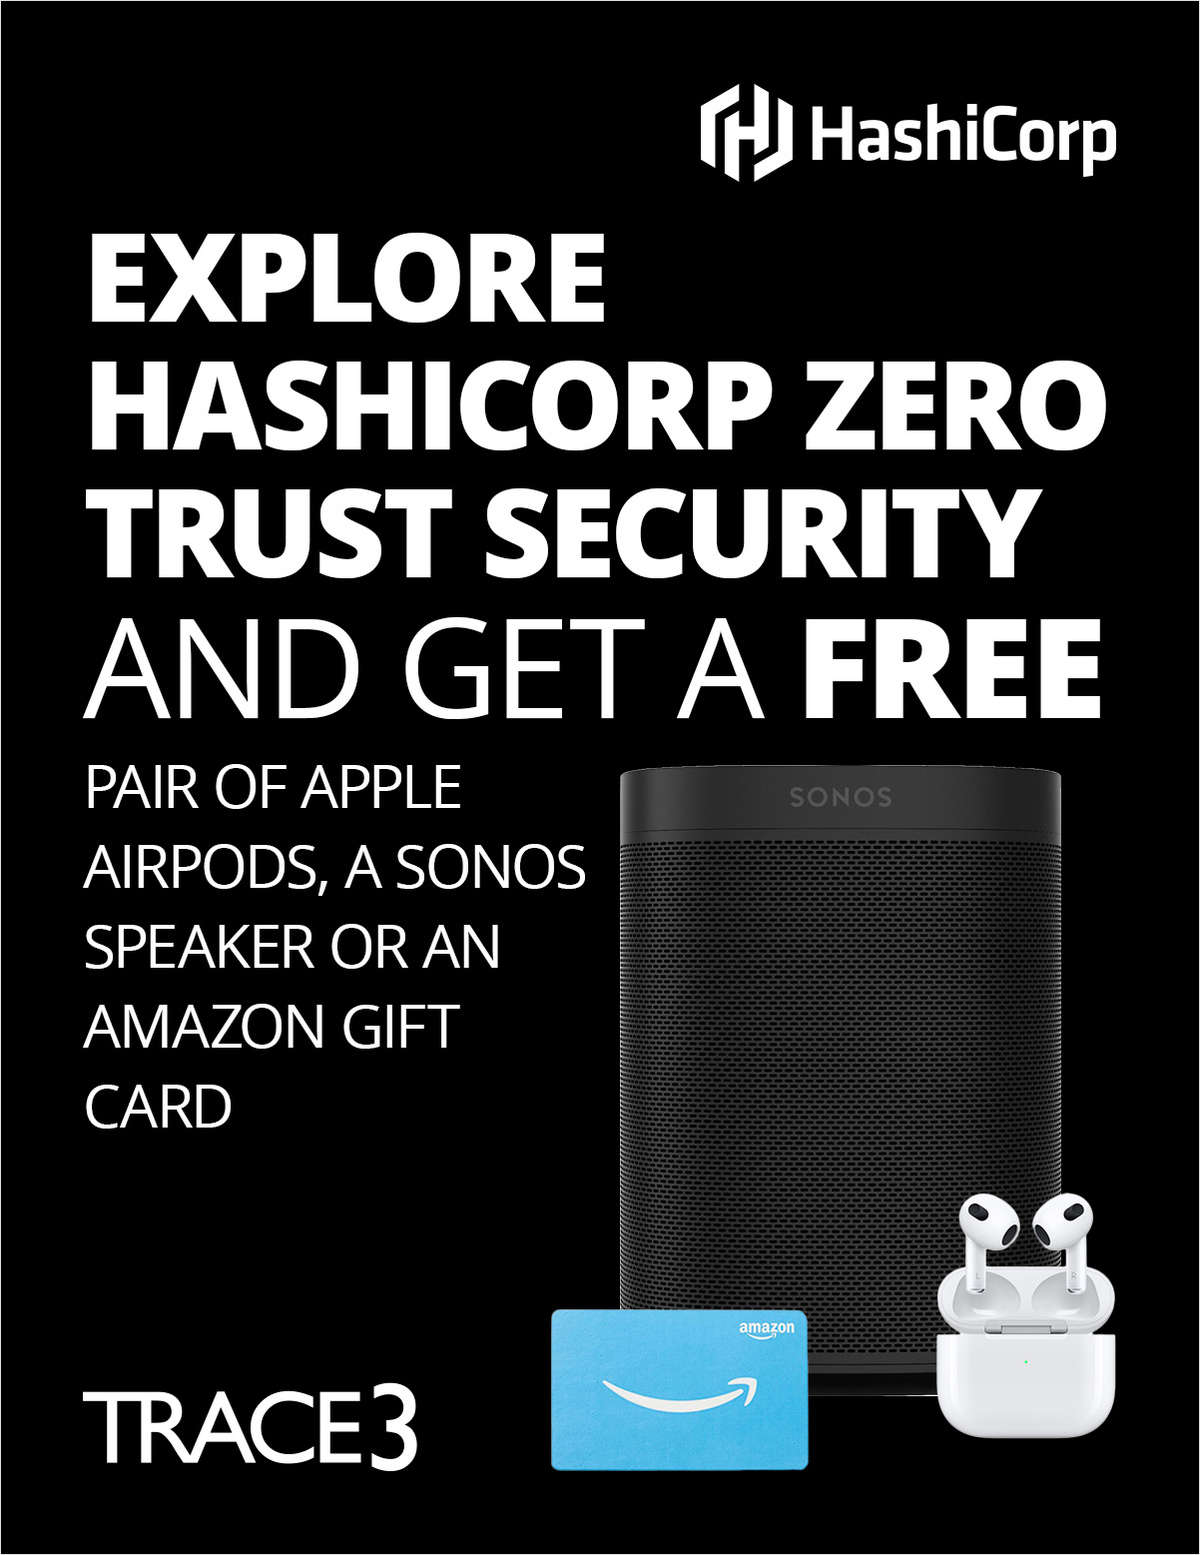 Explore HashiCorp Zero Trust Security and Get a Free Pair of Apple AirPods, a Sonos Speaker or an Amazon Gift Card